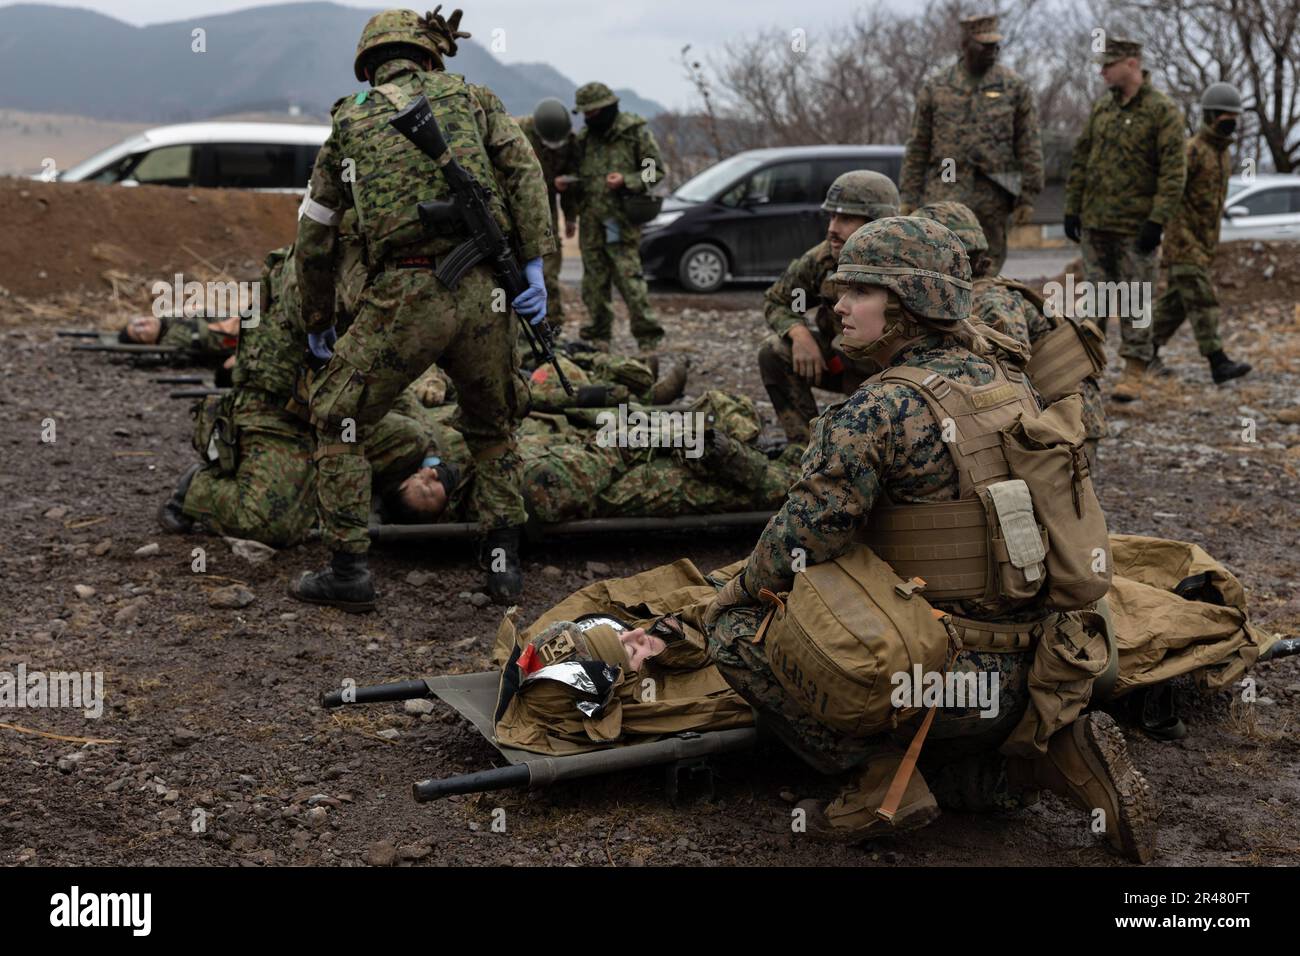 U.S. Navy corpsmen with the 31st Marine Expeditionary Unit, and soldiers with the 1st Amphibious Rapid Deployment Regiment, Japan Ground Self-Defense Force, conduct bi-lateral medical operations during a mass casualty exercise at Hijudai, Japan on Feb. 19, 2023. The training simulated a mass casualty event granting the bi-lateral medical team an opportunity to actively practice medical care in the field with closely simulated pressure and conditions during Iron Fist 23. Iron Fist is an annual bilateral exercise designed to increase interoperability and strengthen the relationships between the Stock Photo